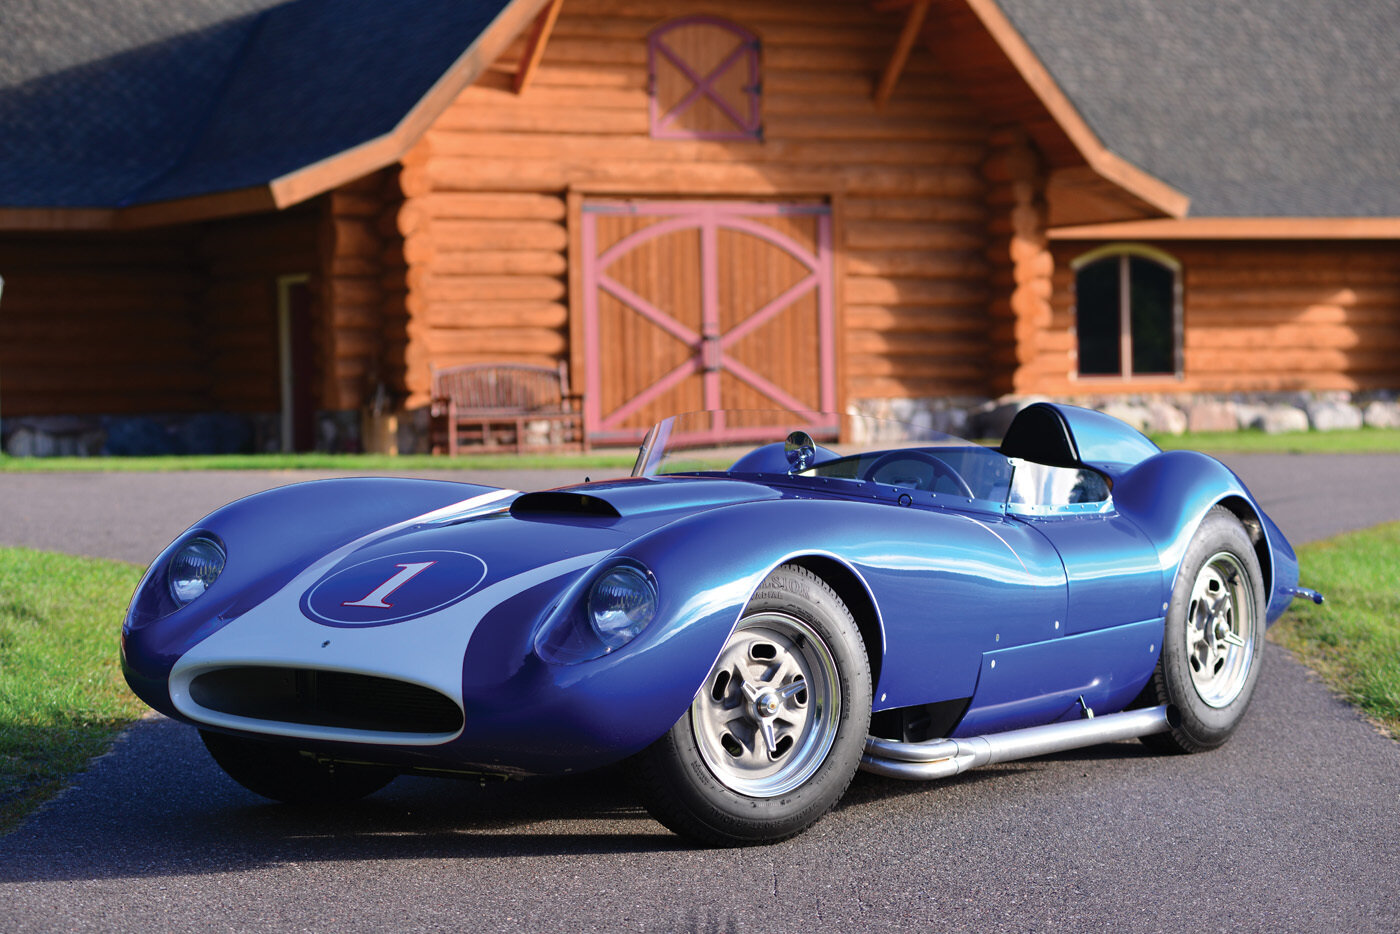 						Scarab Roadster A26
			